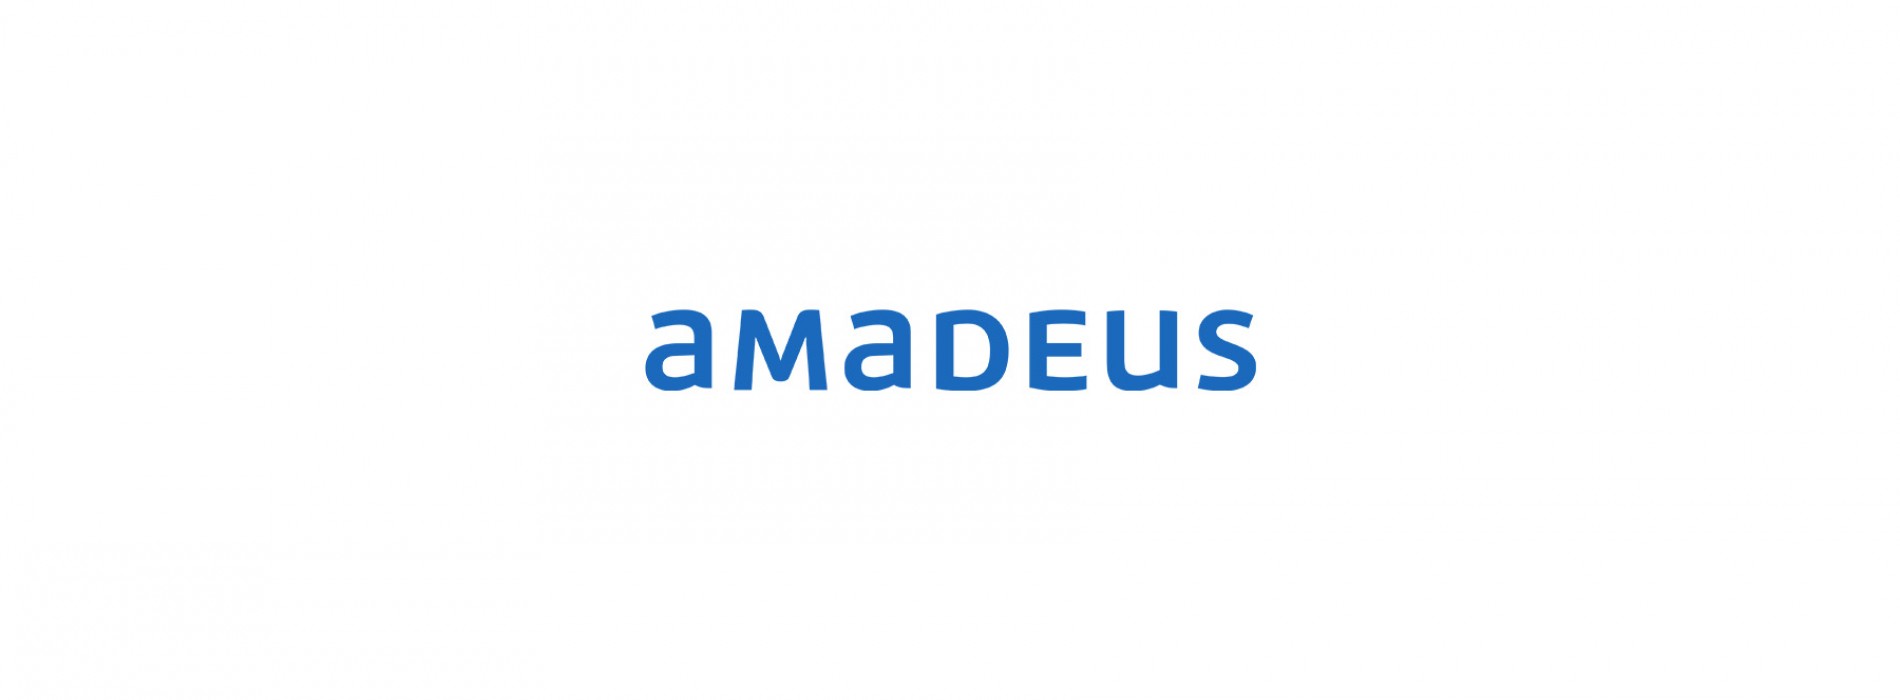 Philippine Airlines takes personalization to new heights with Amadeus Traveler DNA